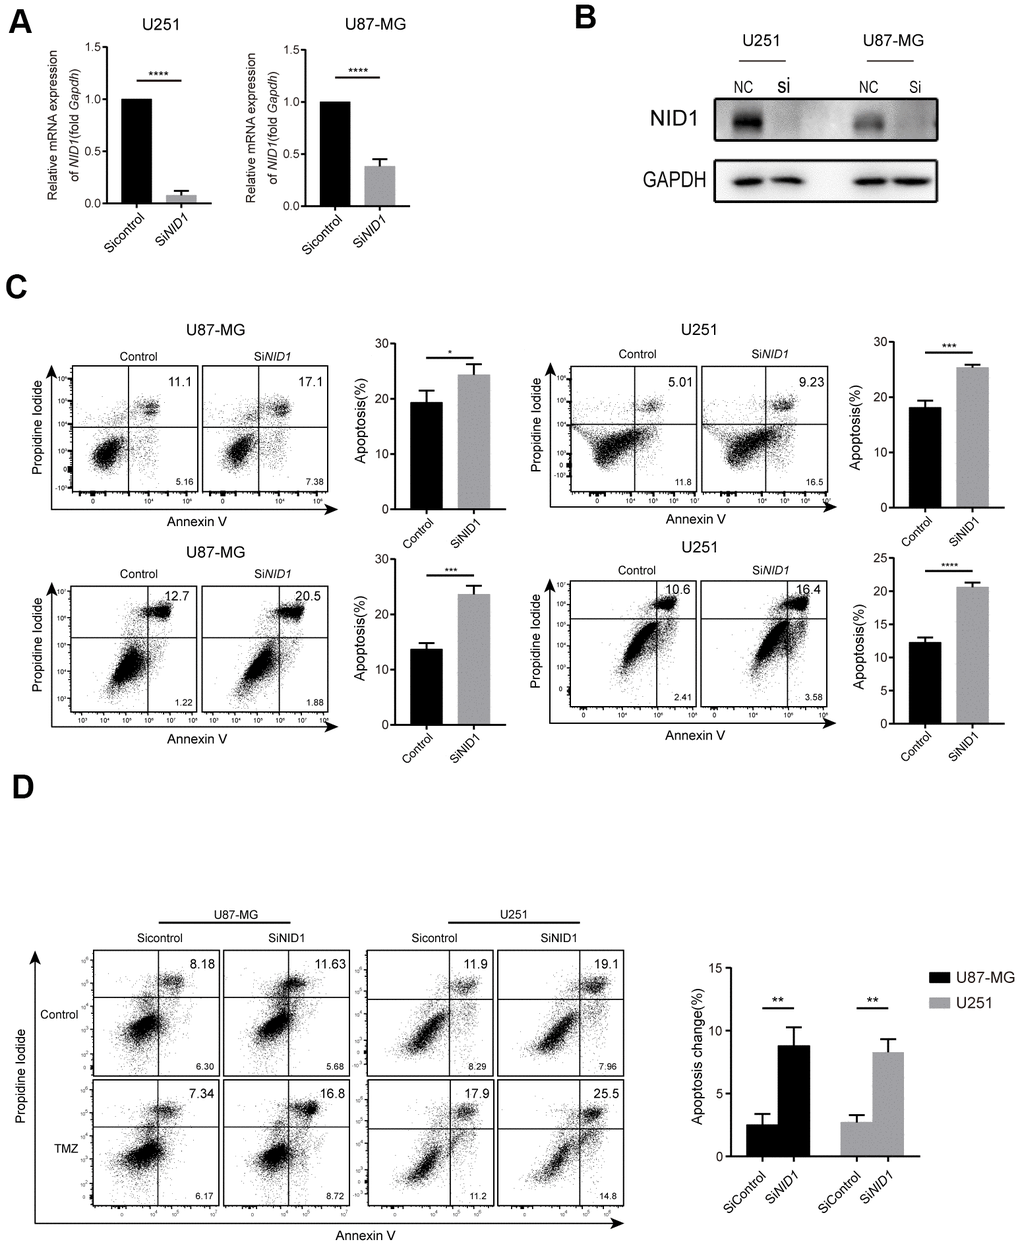 NID1 silencing in U87-MG and U251 glioma cells enhanced apoptosis and sensitivity to TMZ. (A) QRT-PCR analysis shows NID1 mRNA levels in si-NID1- and si-NC-transfected U251 and U87-MG glioma cell lines. (B) Representative western blot shows NID1 protein levels in si-NID1- and si-NC-transfected U251 and U87-MG glioma cell lines. (C) Representative FACS plots and histograms show percentage apoptosis in si-NID1- and si-NC-transfected U251 and U87-MG glioma cells based on AnnexinV-FITC/PI staining. (D) Representative FACS plots and histograms show percentage apoptosis in si-NID1- and si-NC-transfected U251 and U87-MG glioma cells treated with or without TMZ. As shown, NID1 silencing improved temozolomide (TMZ) sensitivity in glioma cells. Note: * PP